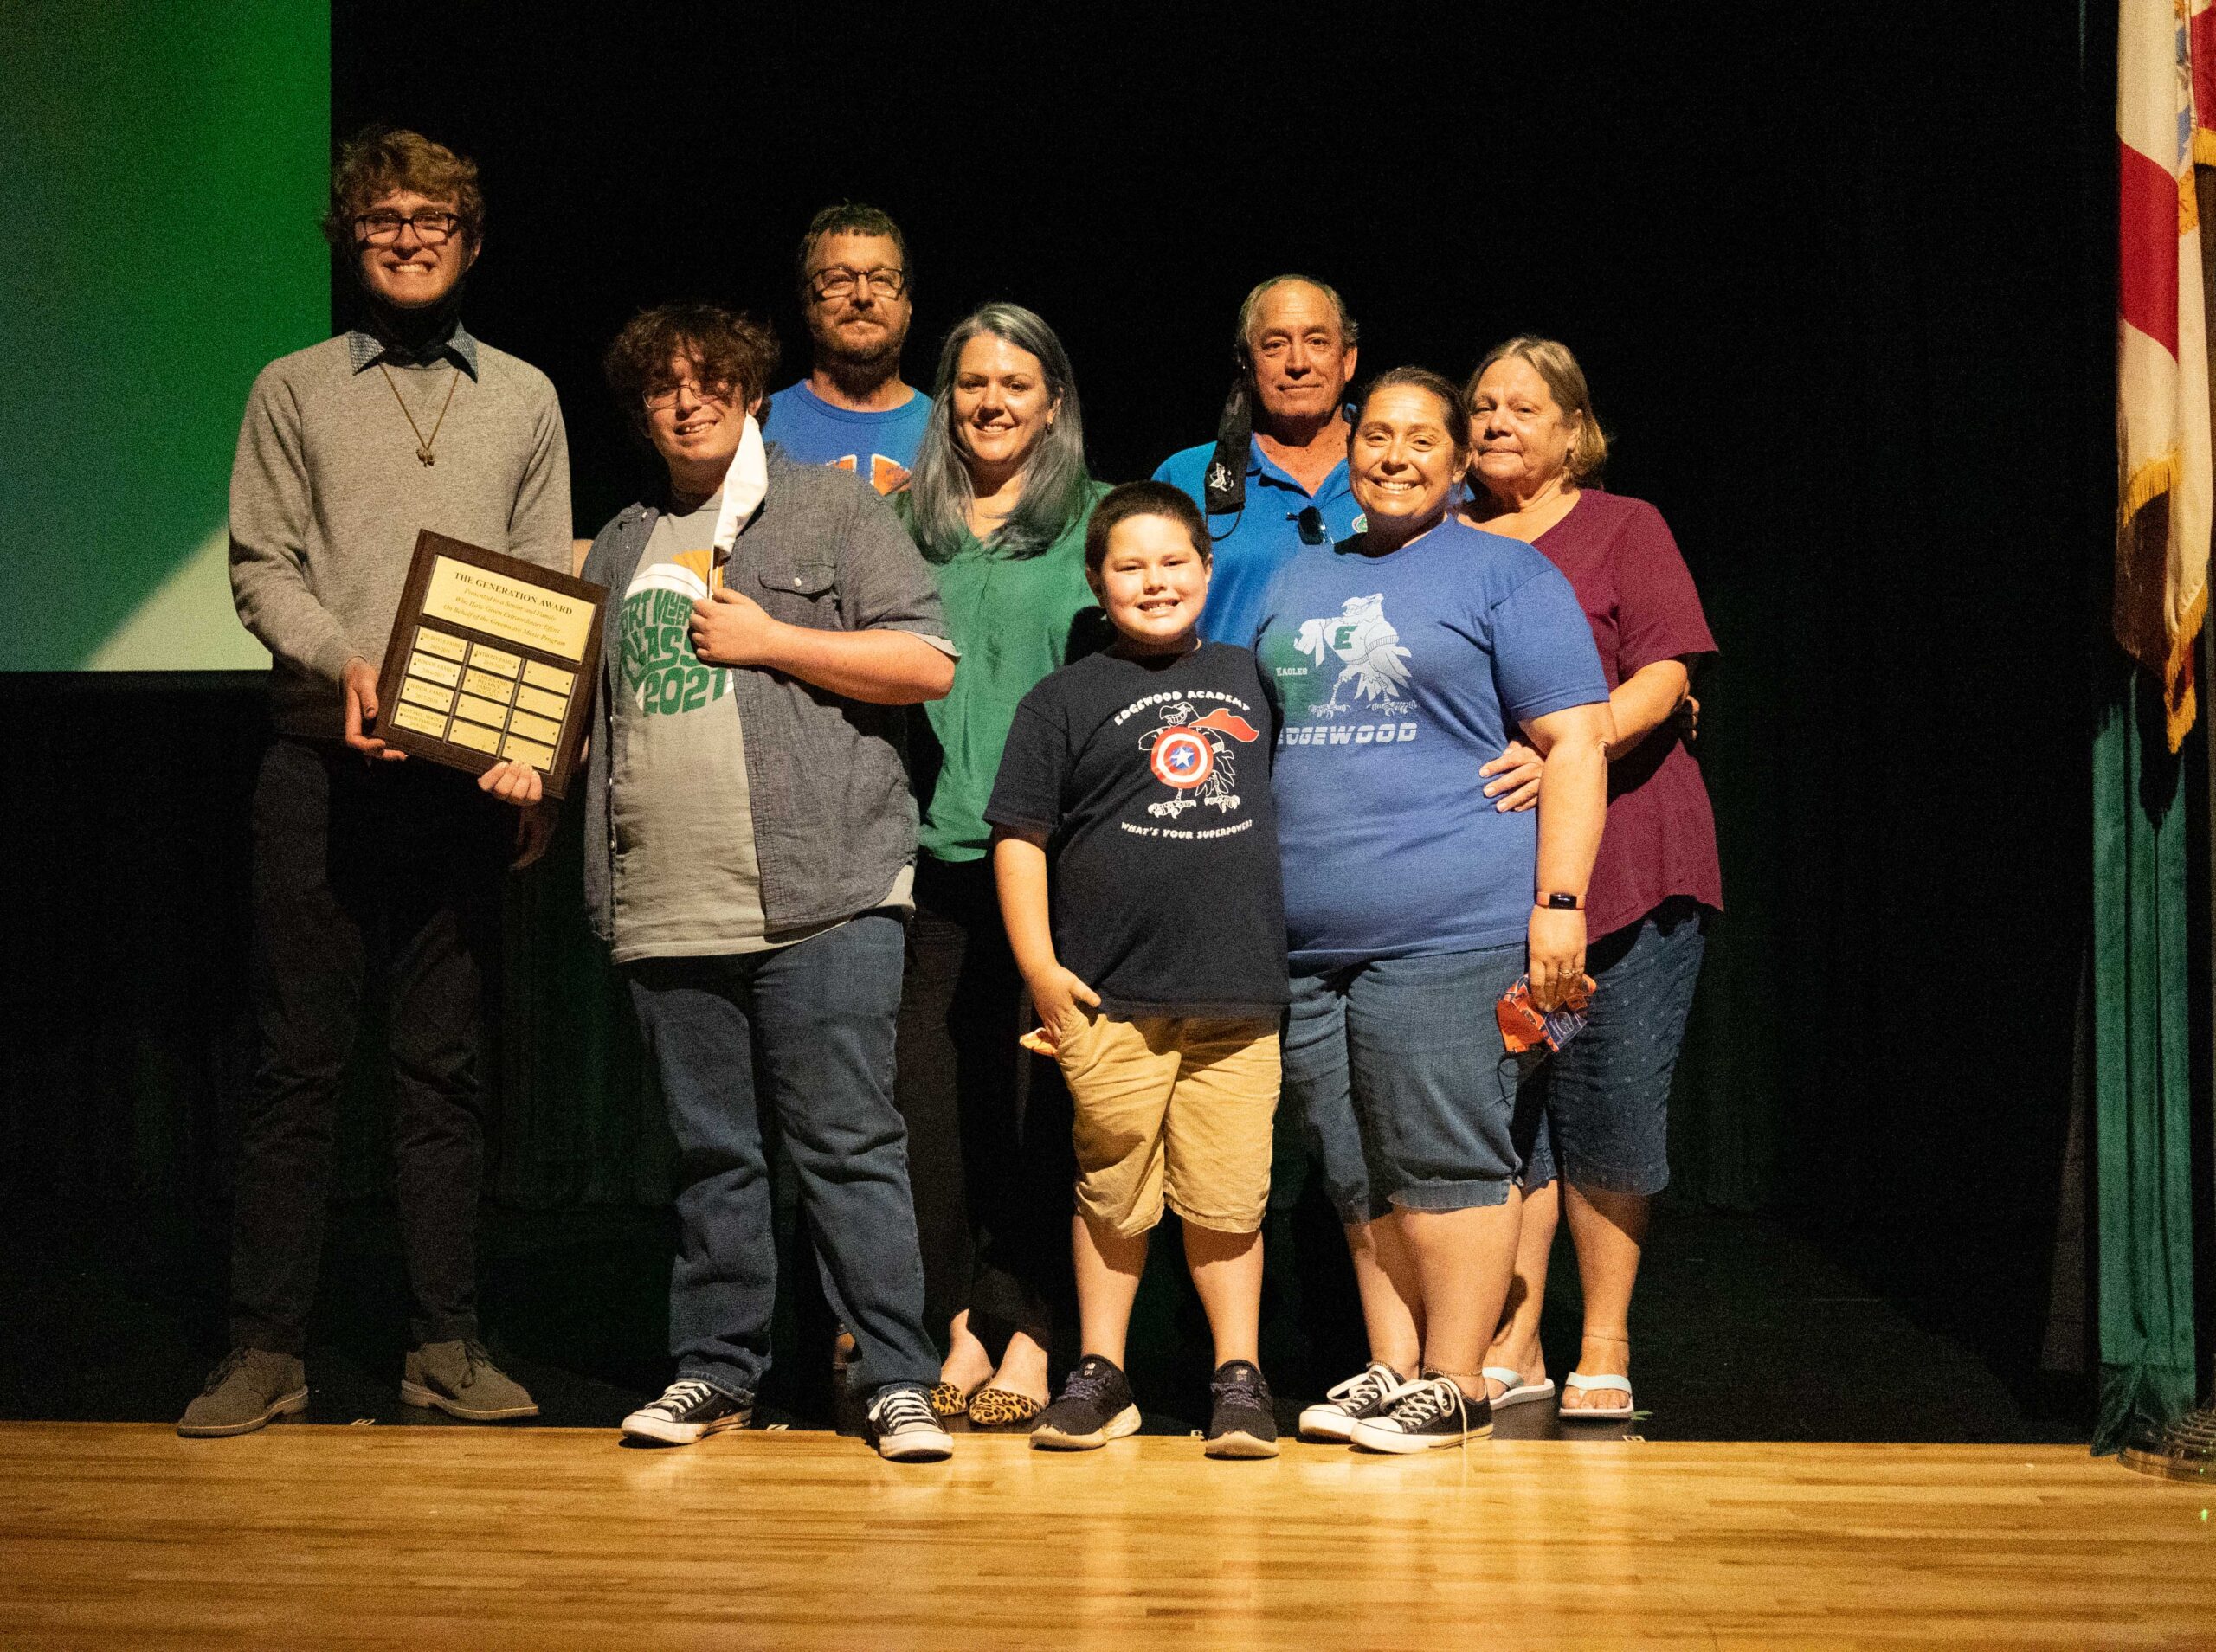 Lynch Award to Lamers & Helmick Families